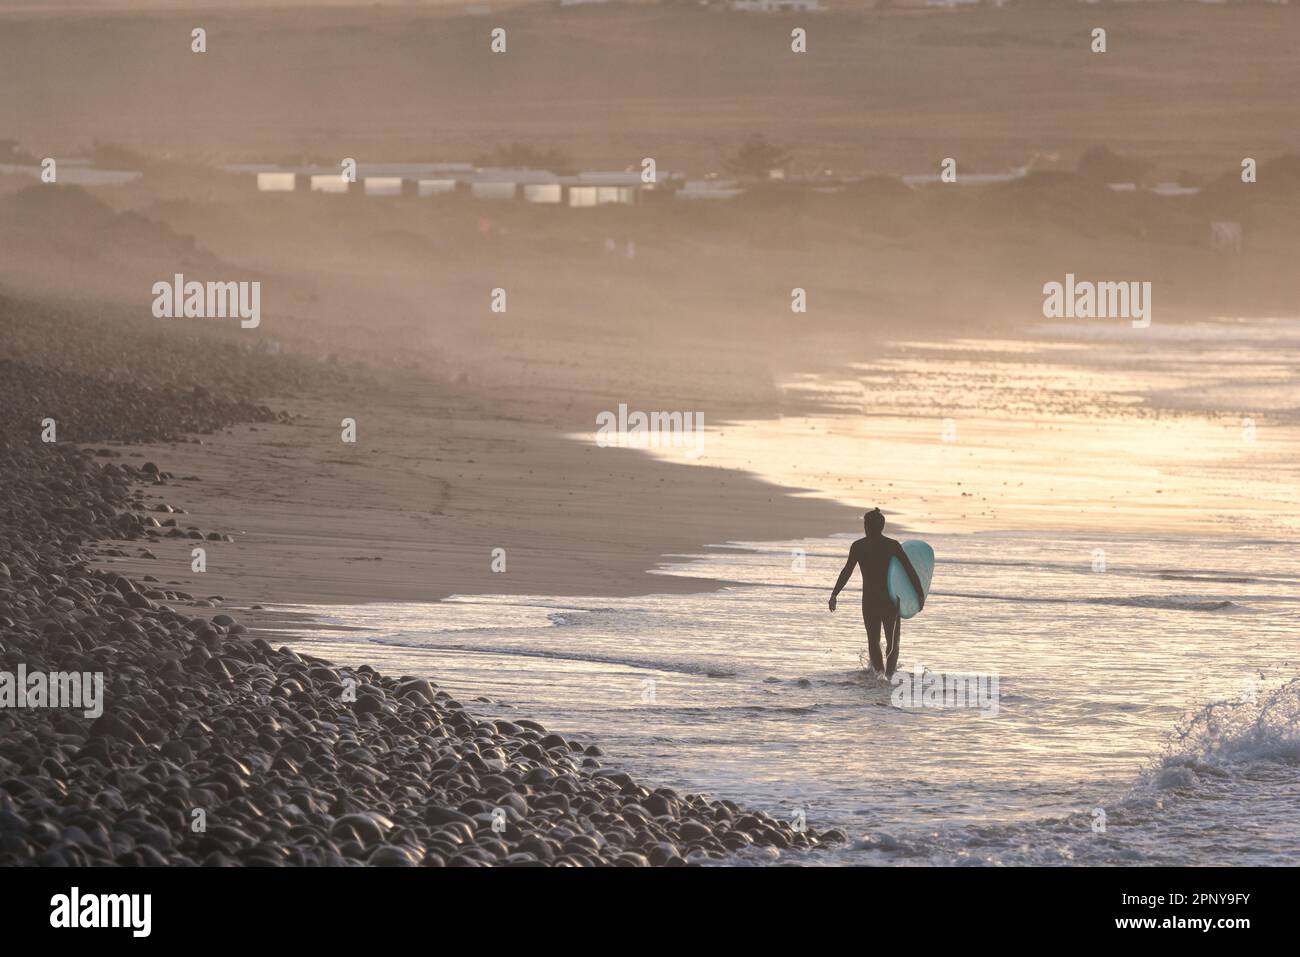 surfer coming out of the water at sunset Stock Photo